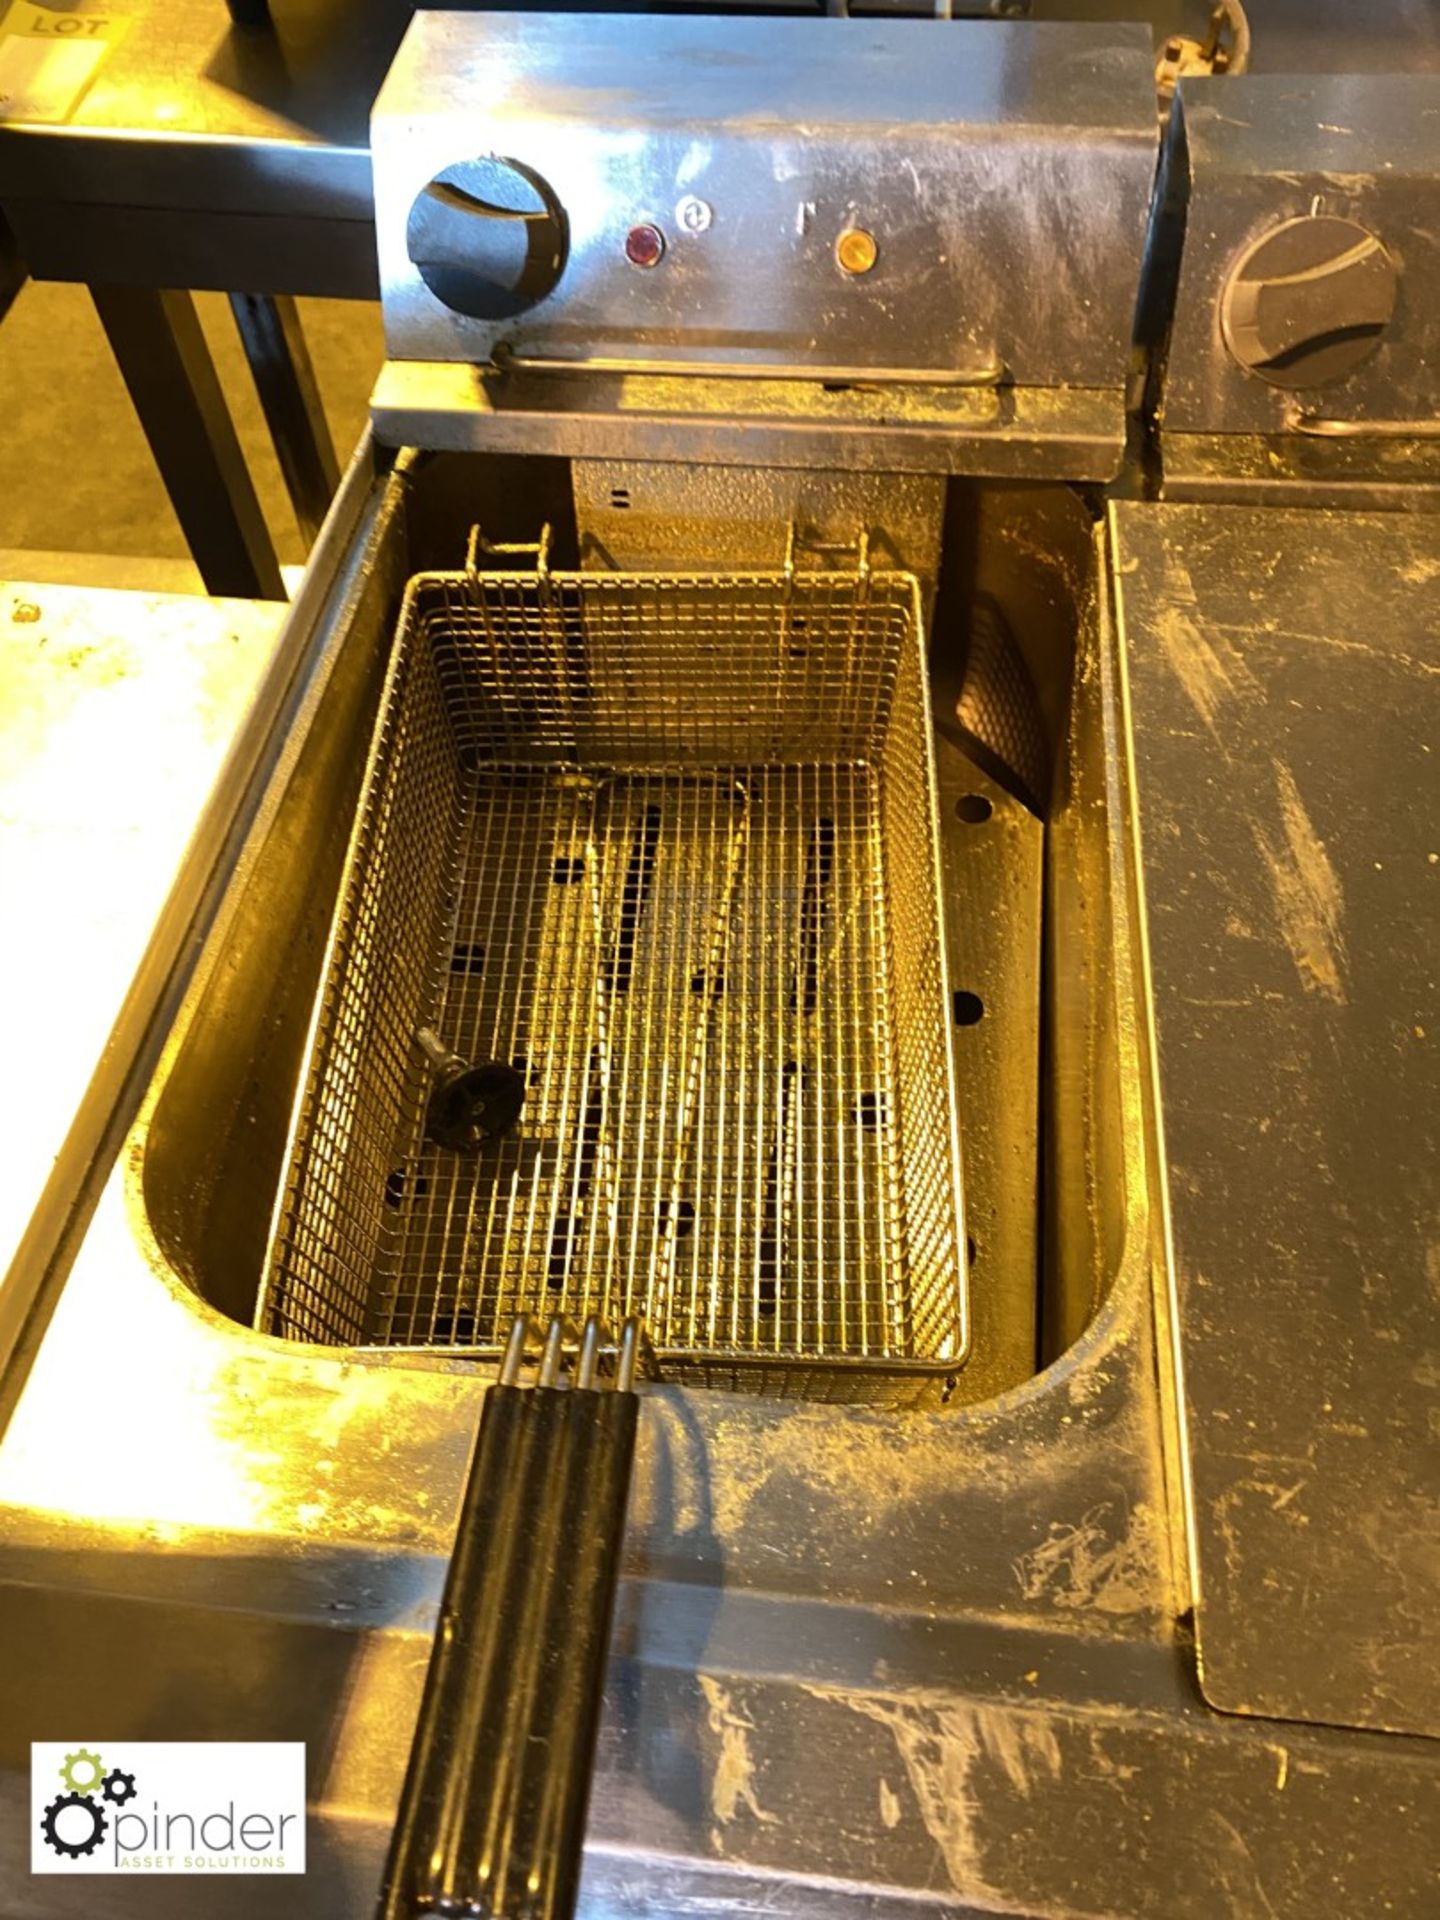 Stainless steel twin basket Deep Fat Fryer, 400volts - Image 2 of 2